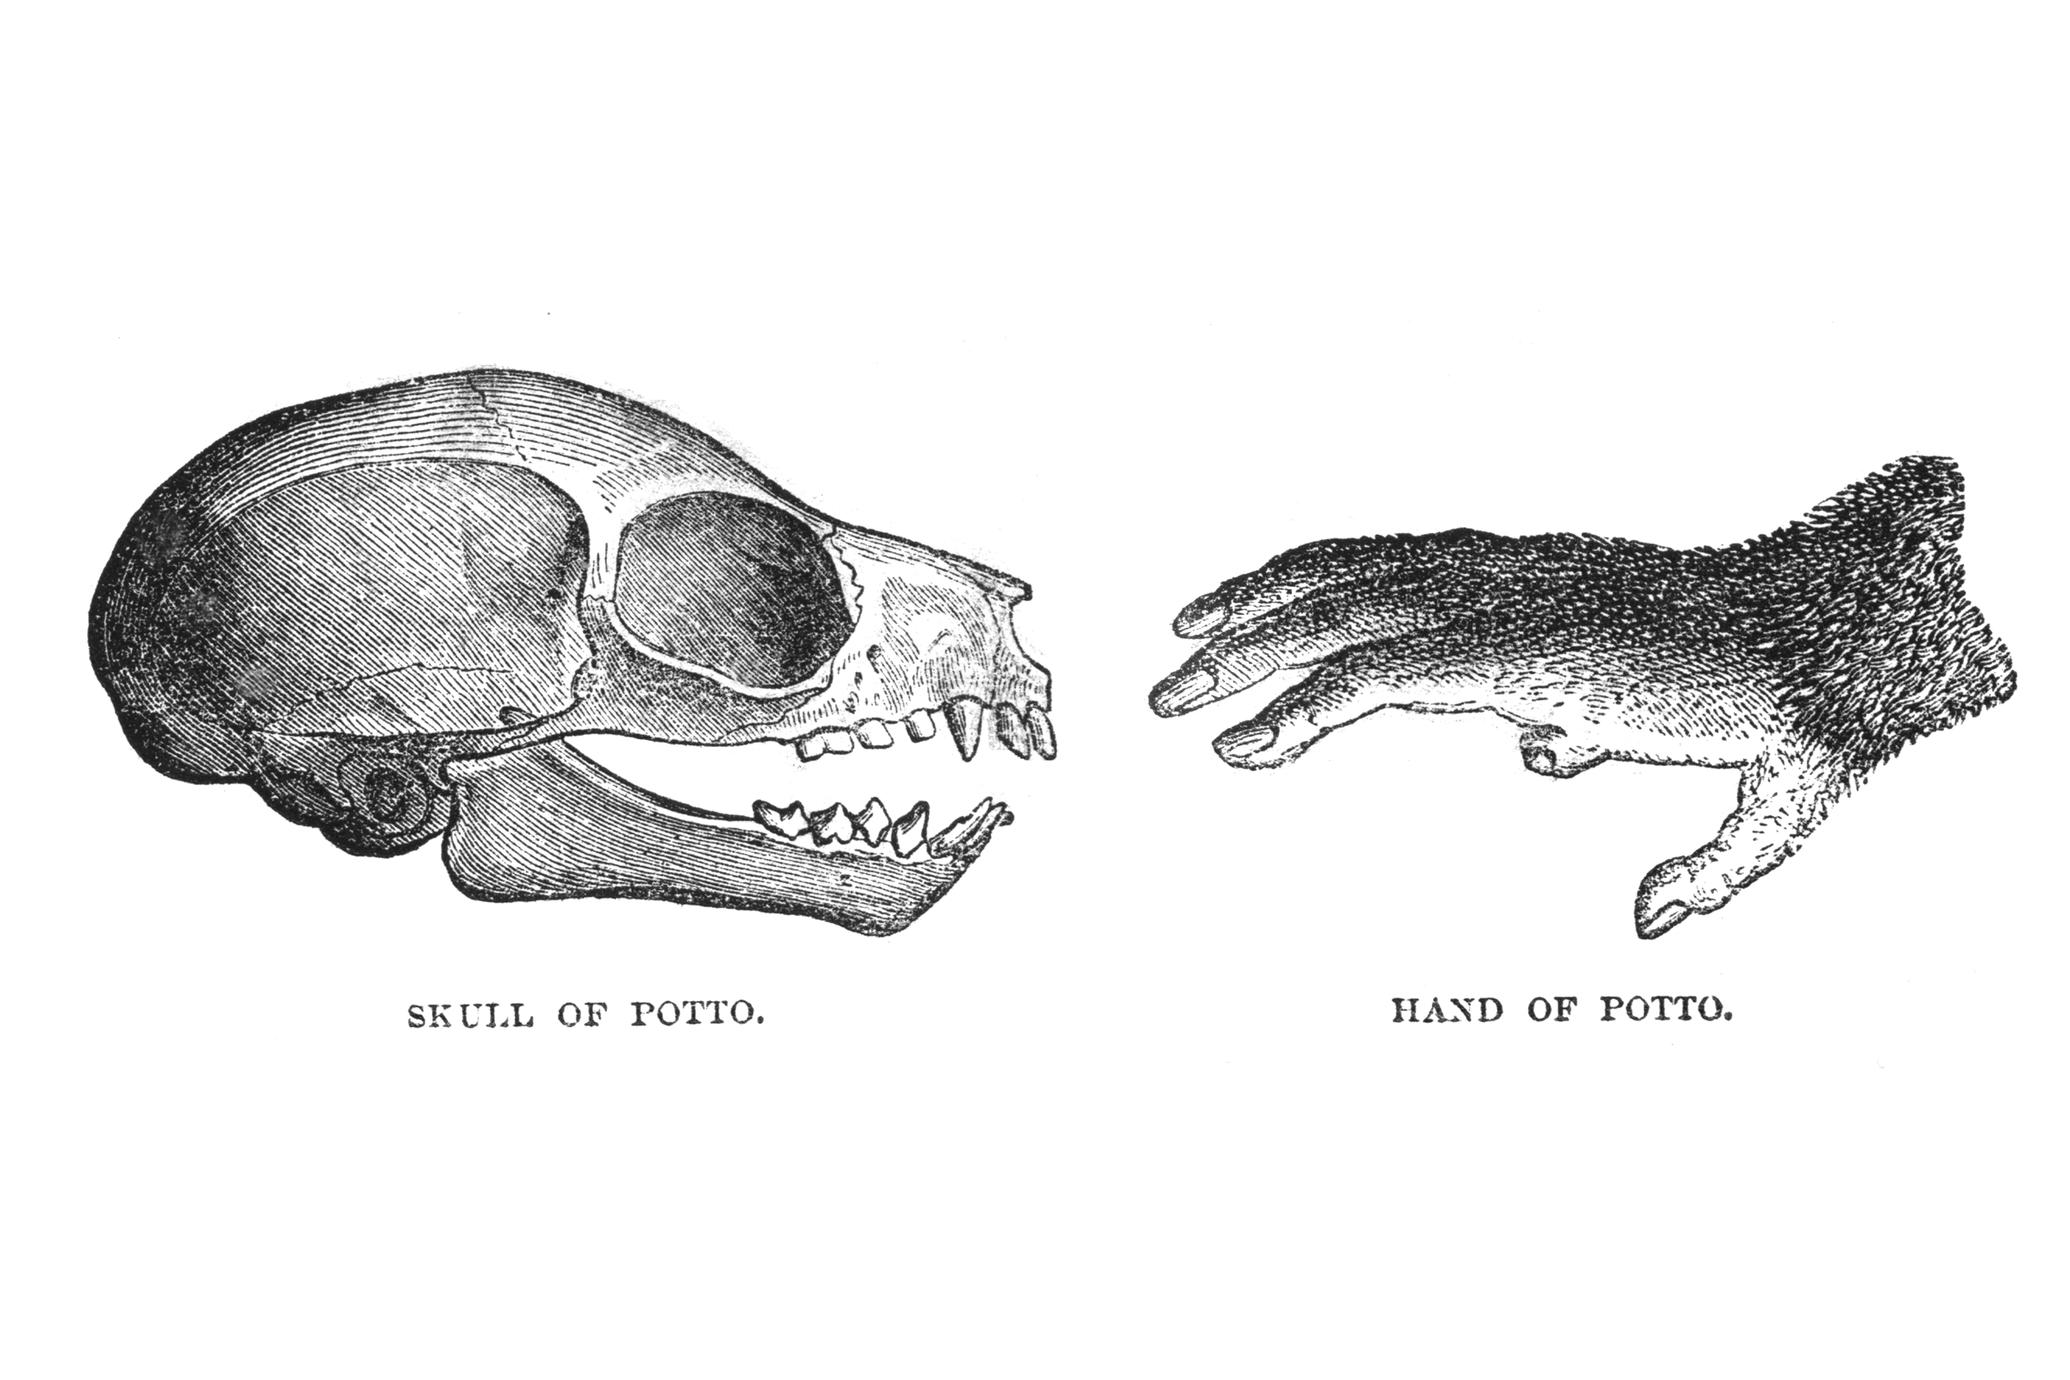 Skull of Potto and Hand of Potto